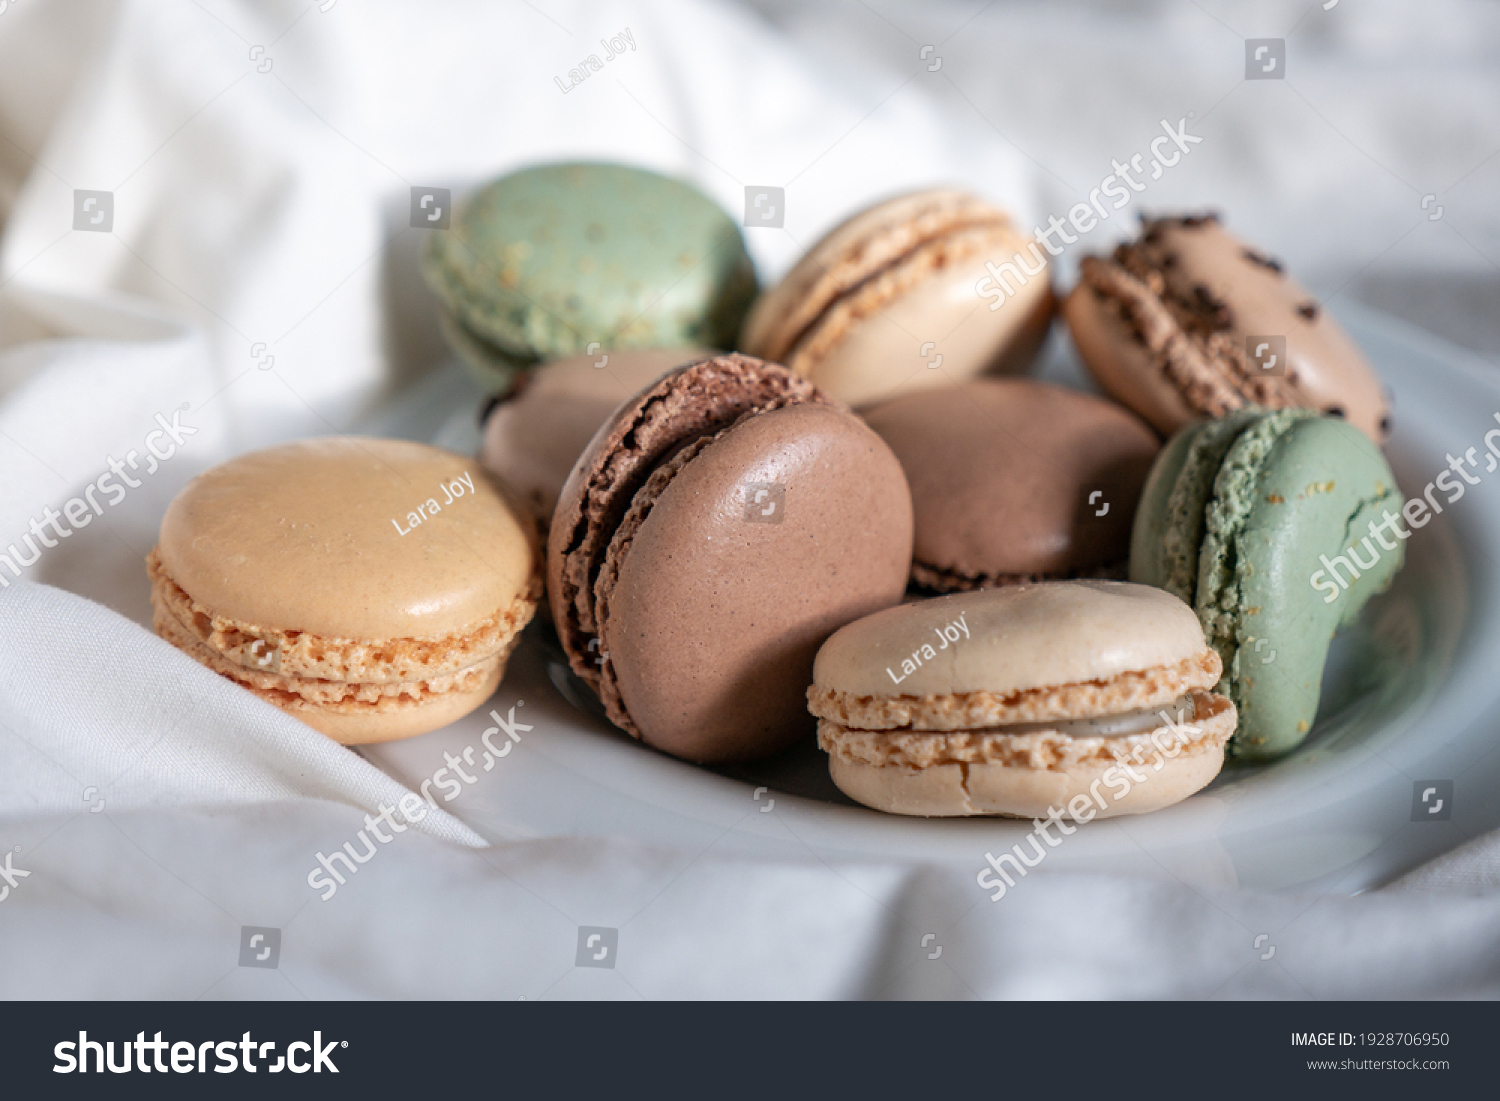 French Colorful Macarons Colorful Pastel Macarons on White Background green beige and Brown Macaron on plate dessert Sweet and colourful french macaroons pastry #1928706950